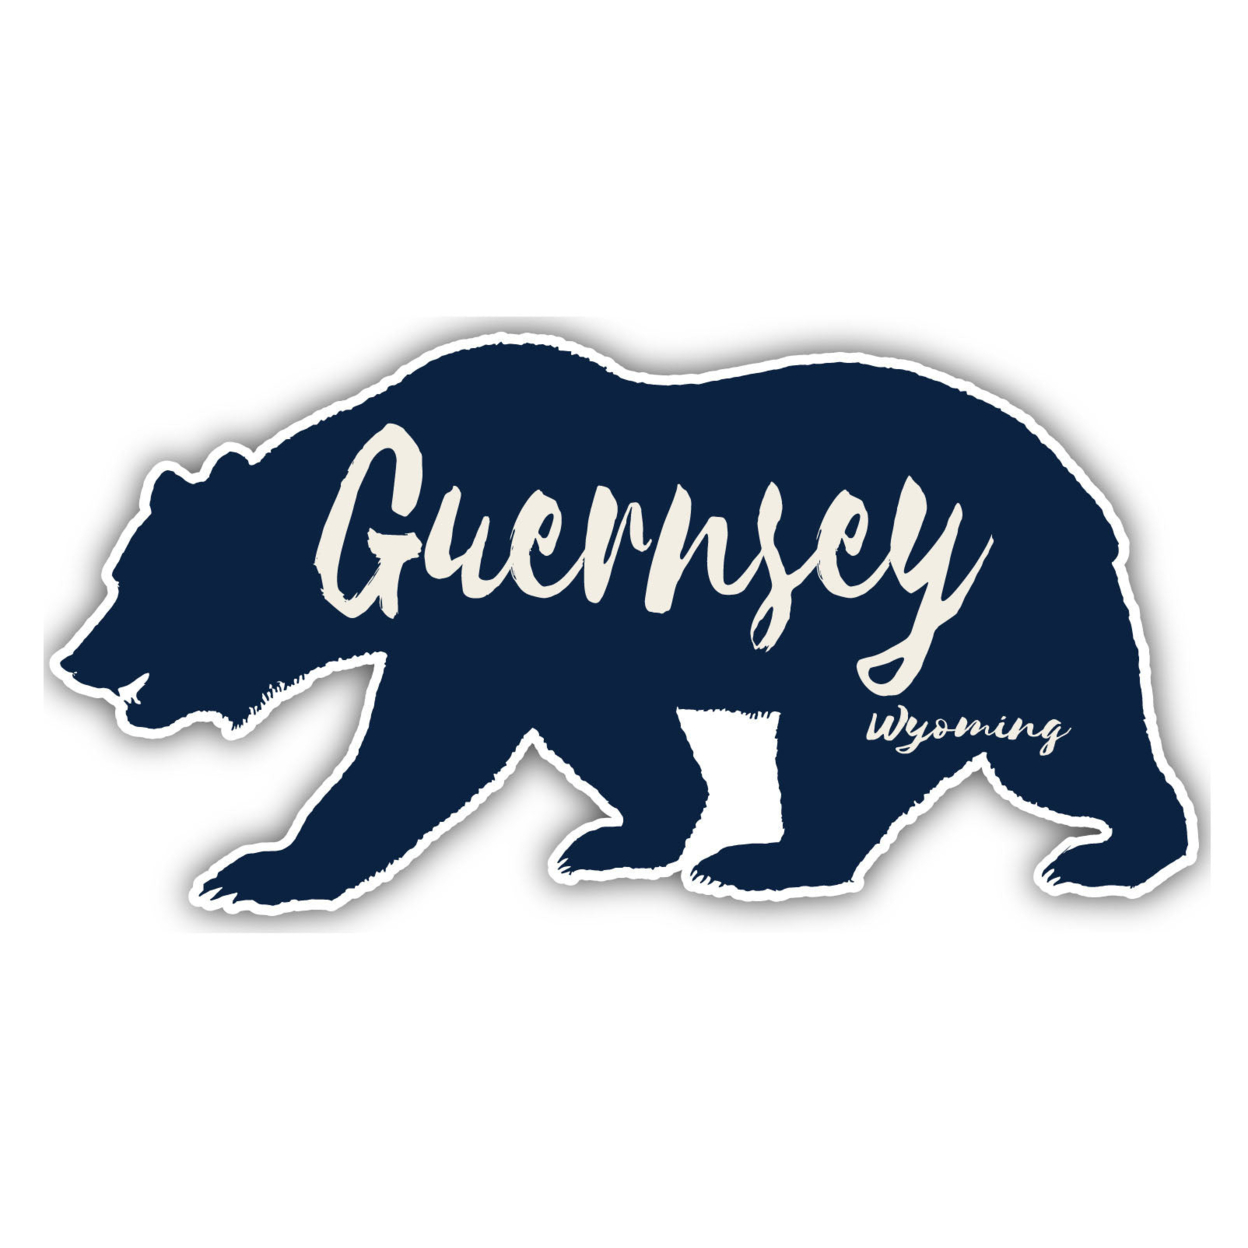 Guernsey Wyoming Souvenir Decorative Stickers (Choose Theme And Size) - Single Unit, 8-Inch, Bear